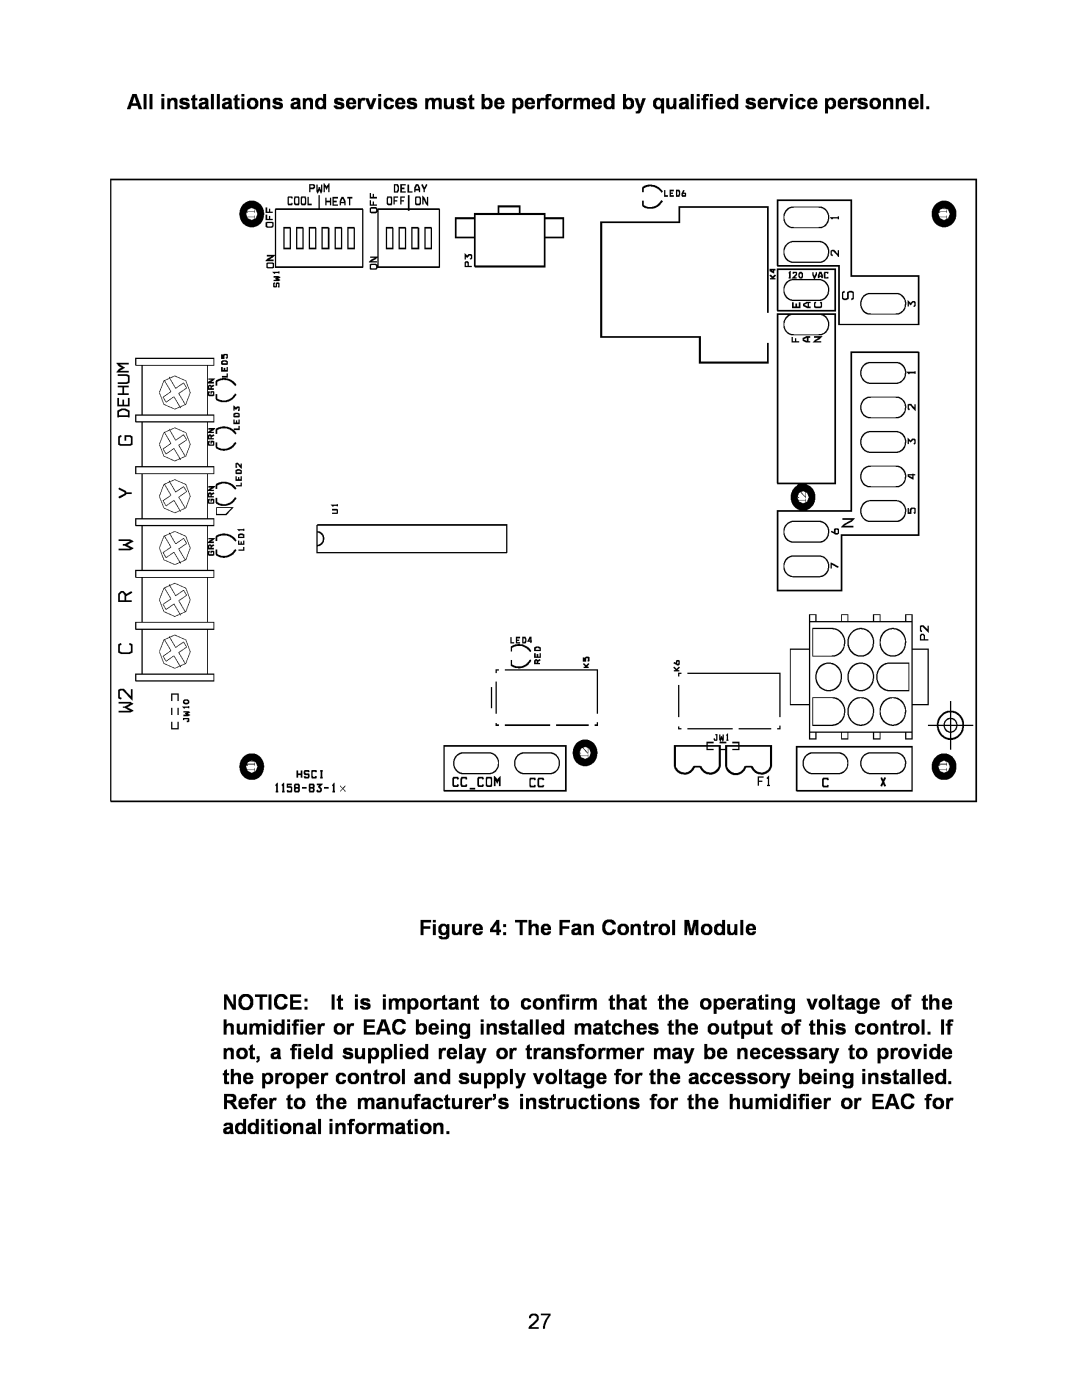 Thermo Products 36)- 80, OPB (24, 30 service manual The Fan Control Module 